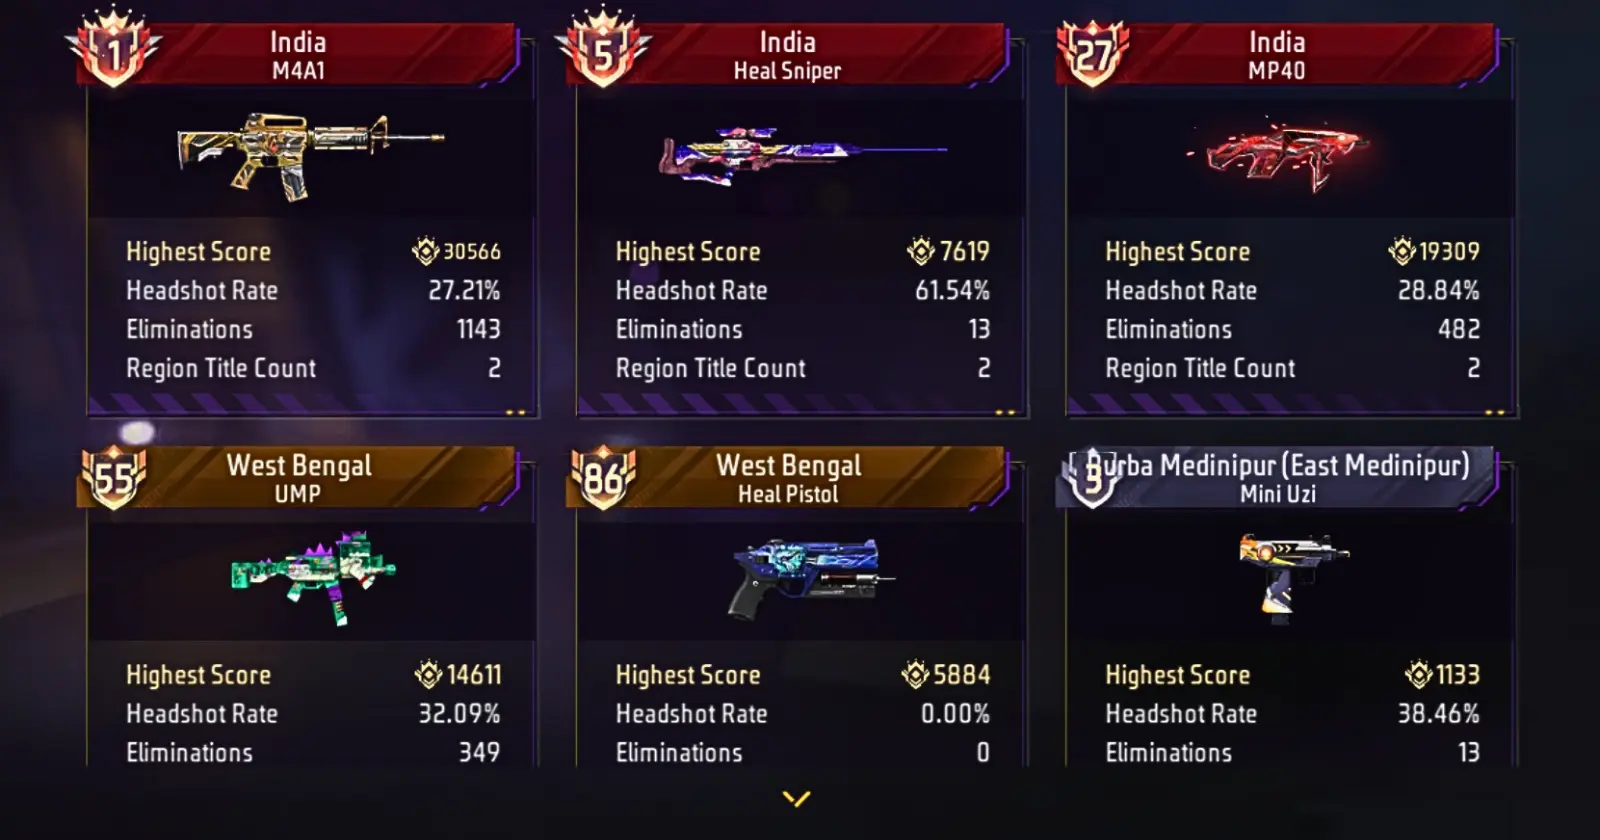 Free Fire Weapon Glory for 5 weapons, India M4A1, India Heal Sniper, India MP40, West Bengal UMP and more